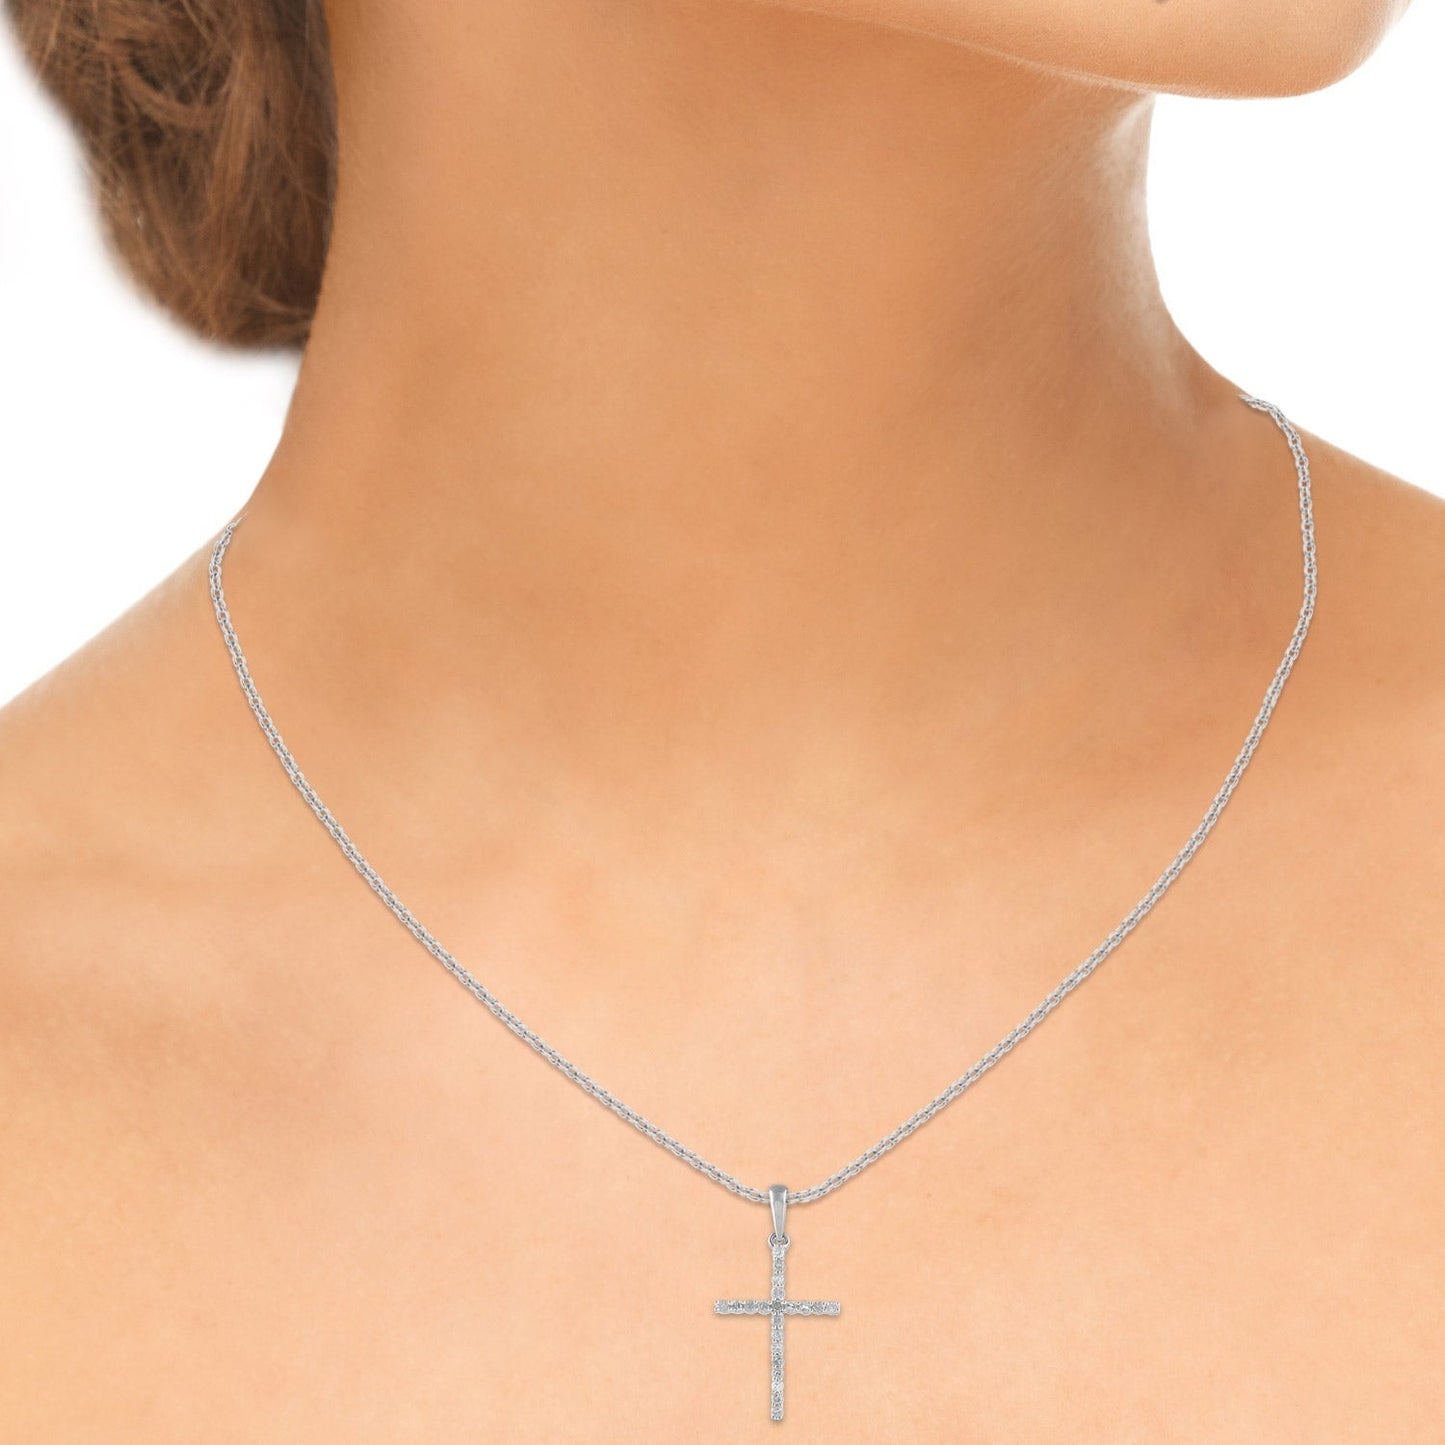 1/3 Carat Natural Round Diamonds Cross Pendant Necklace in 10K Gold